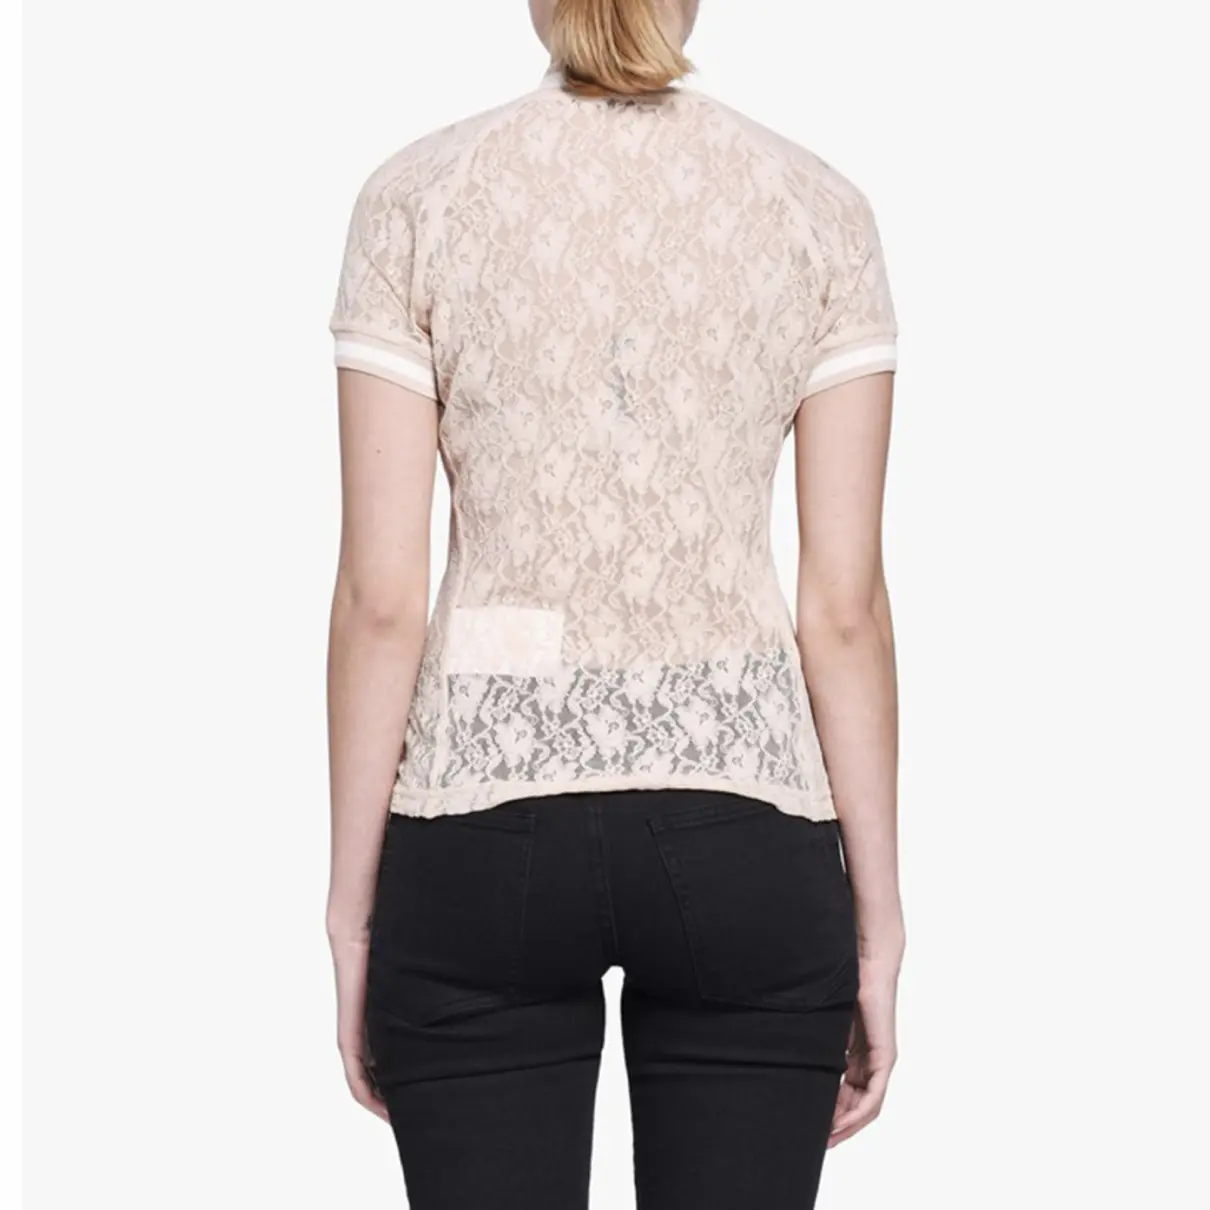 Lace jersey top T by Alexander Wang